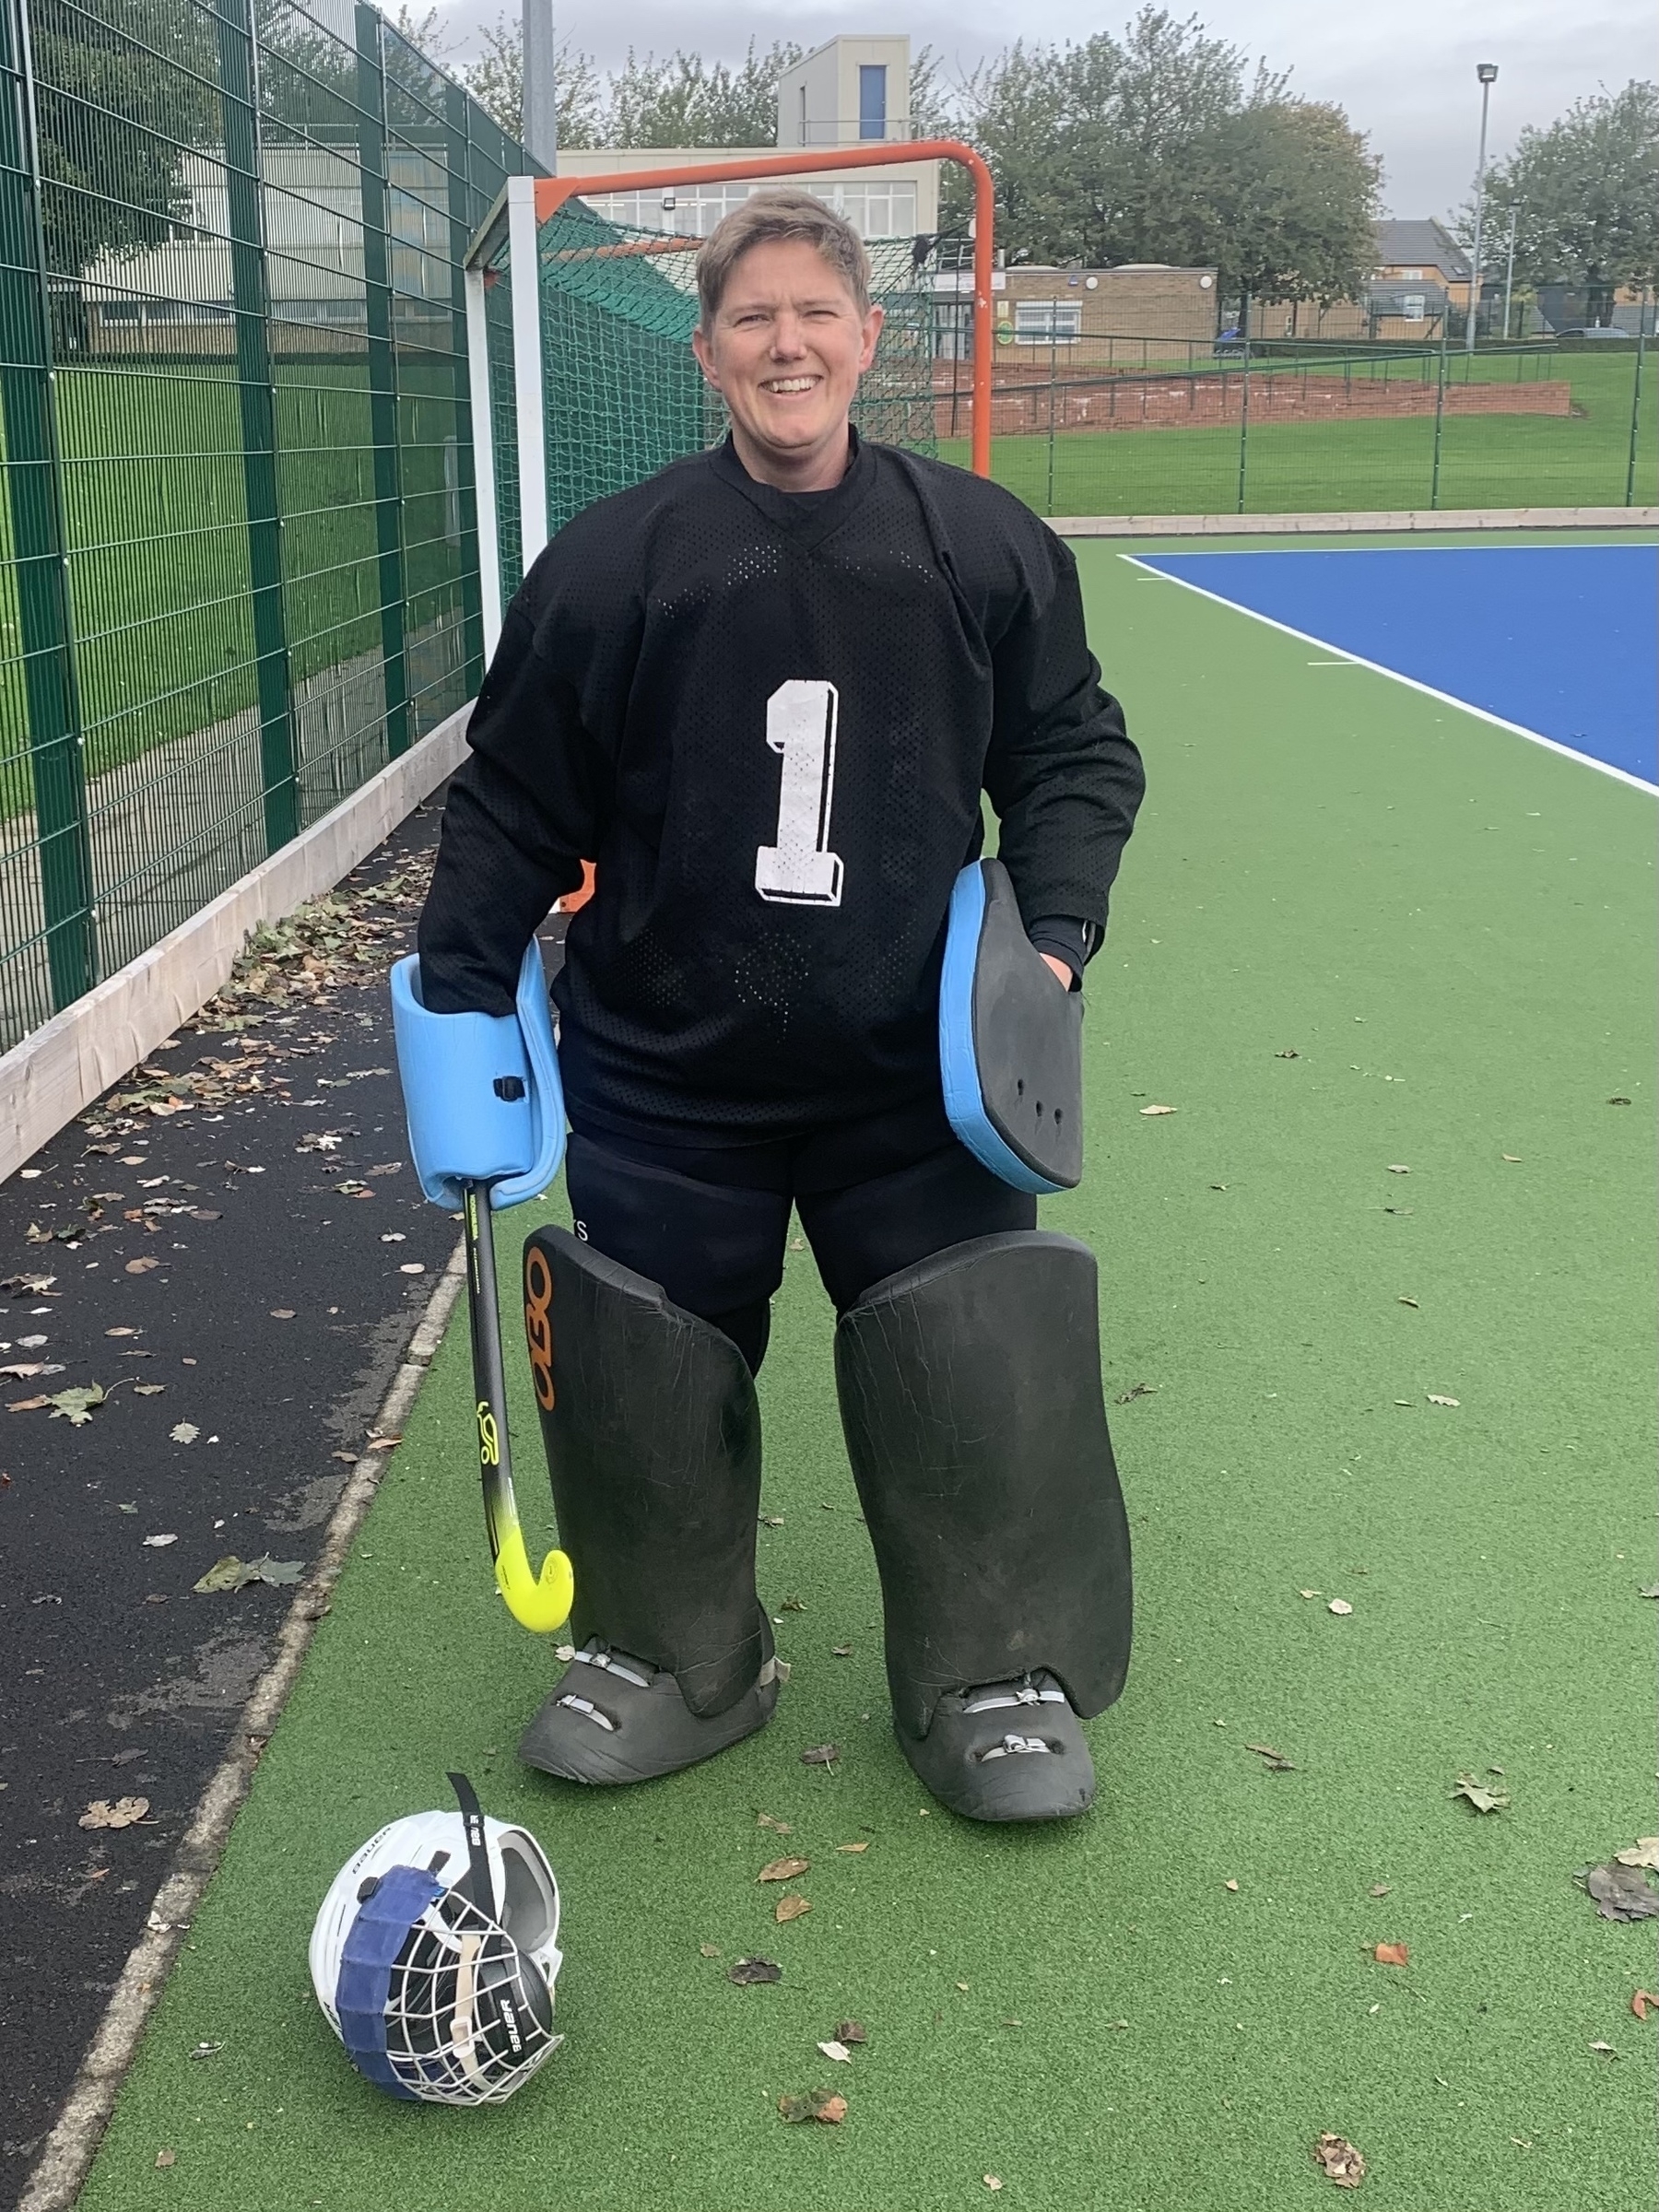 Fully kitted up field hockey goalkeeper minus helmet which lies on the pitch before them.